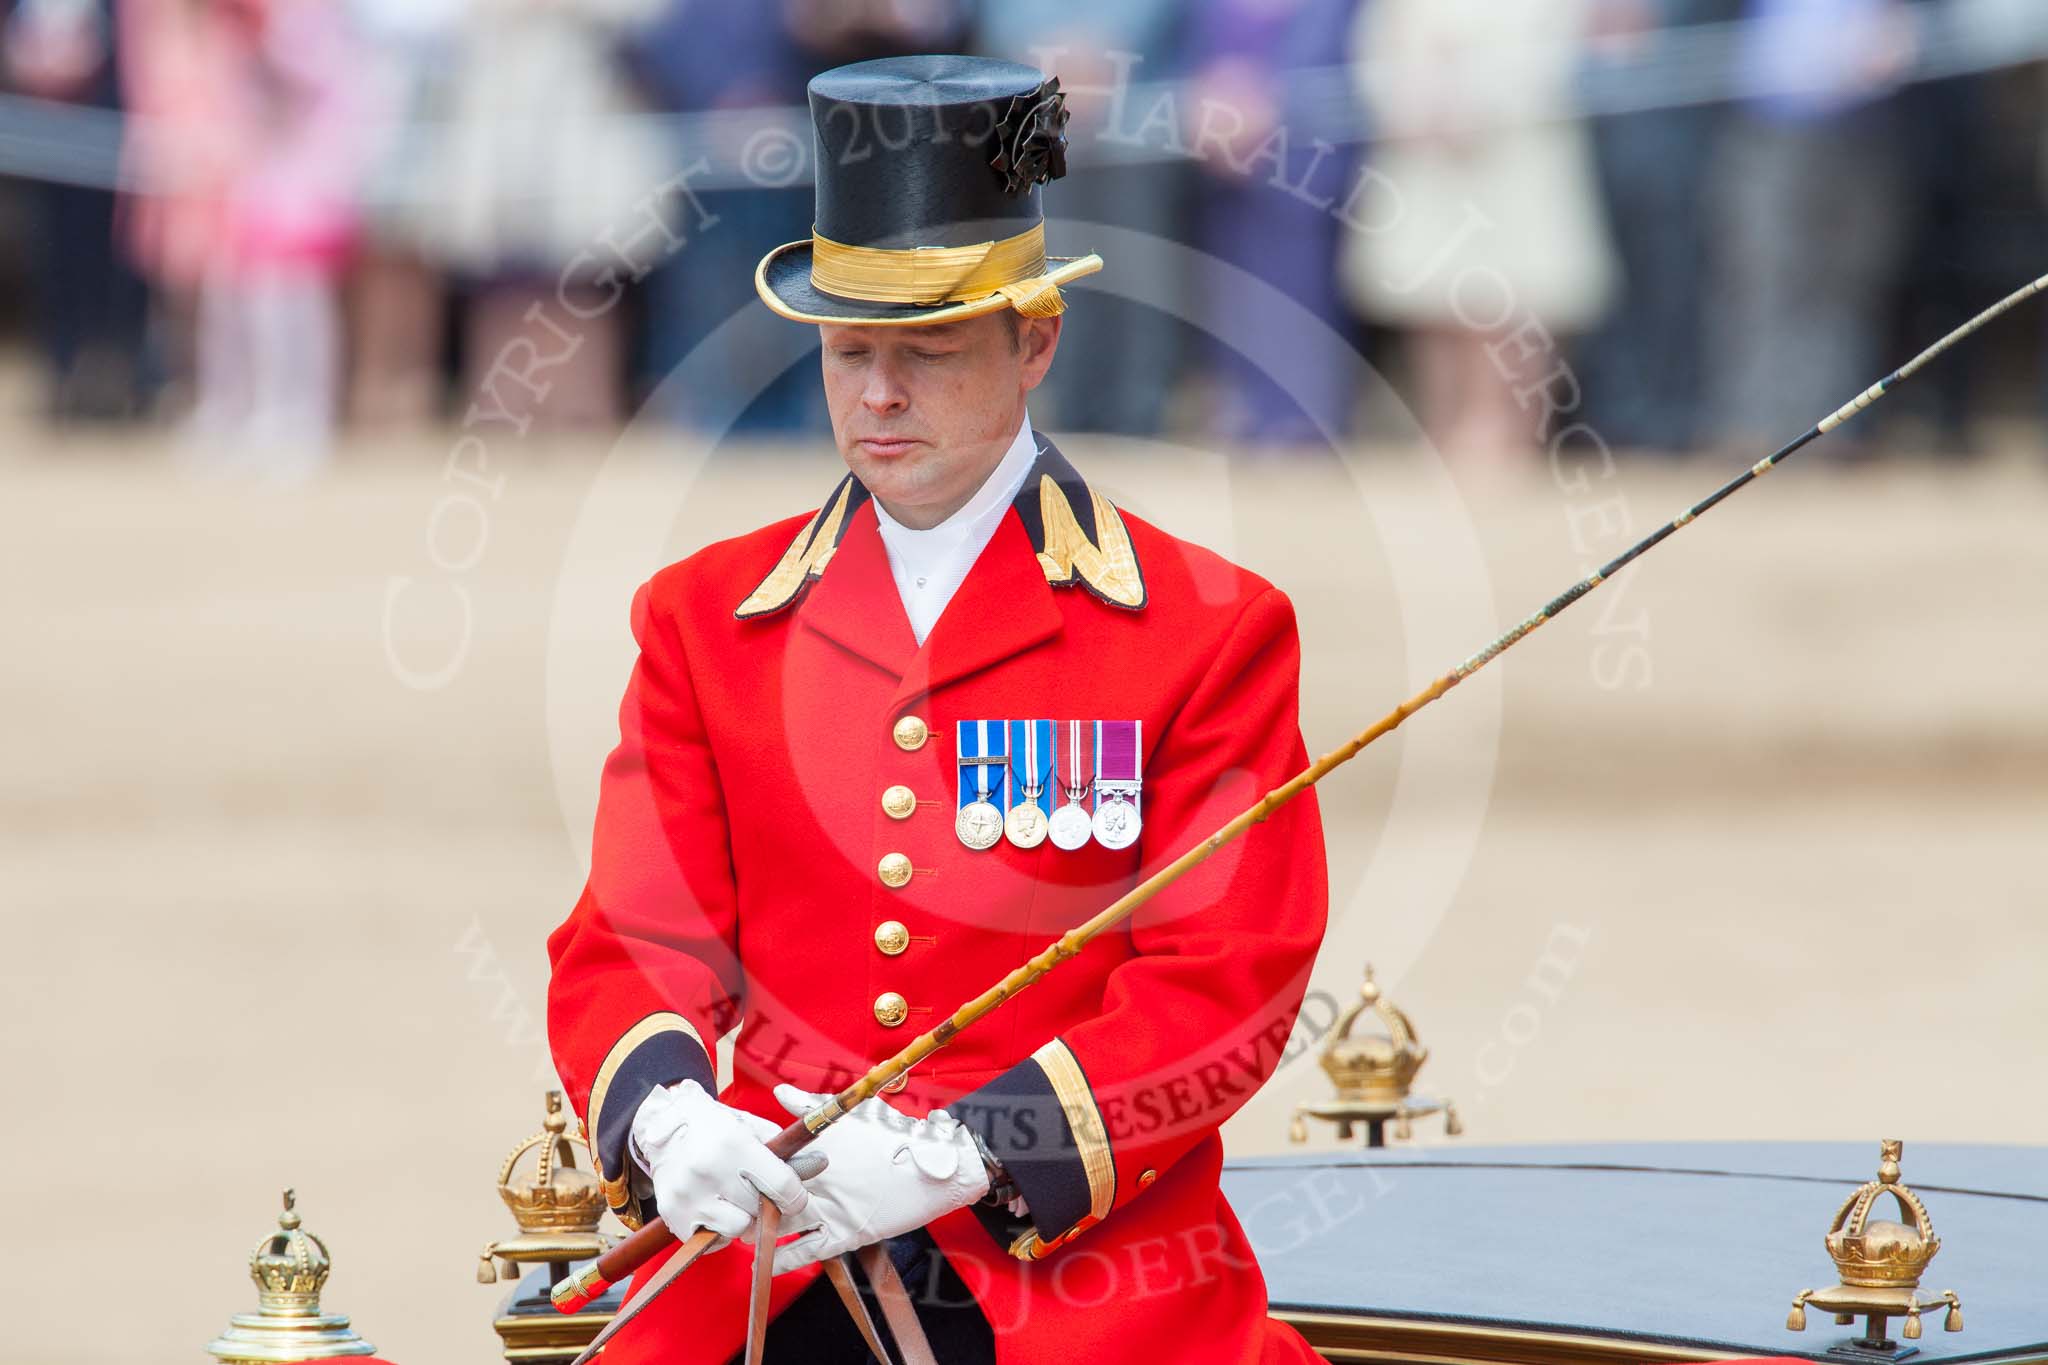 Trooping the Colour 2013: The Head Coachman, Mark Hargreaves, in charge of the glass coach. Image #798, 15 June 2013 12:08 Horse Guards Parade, London, UK